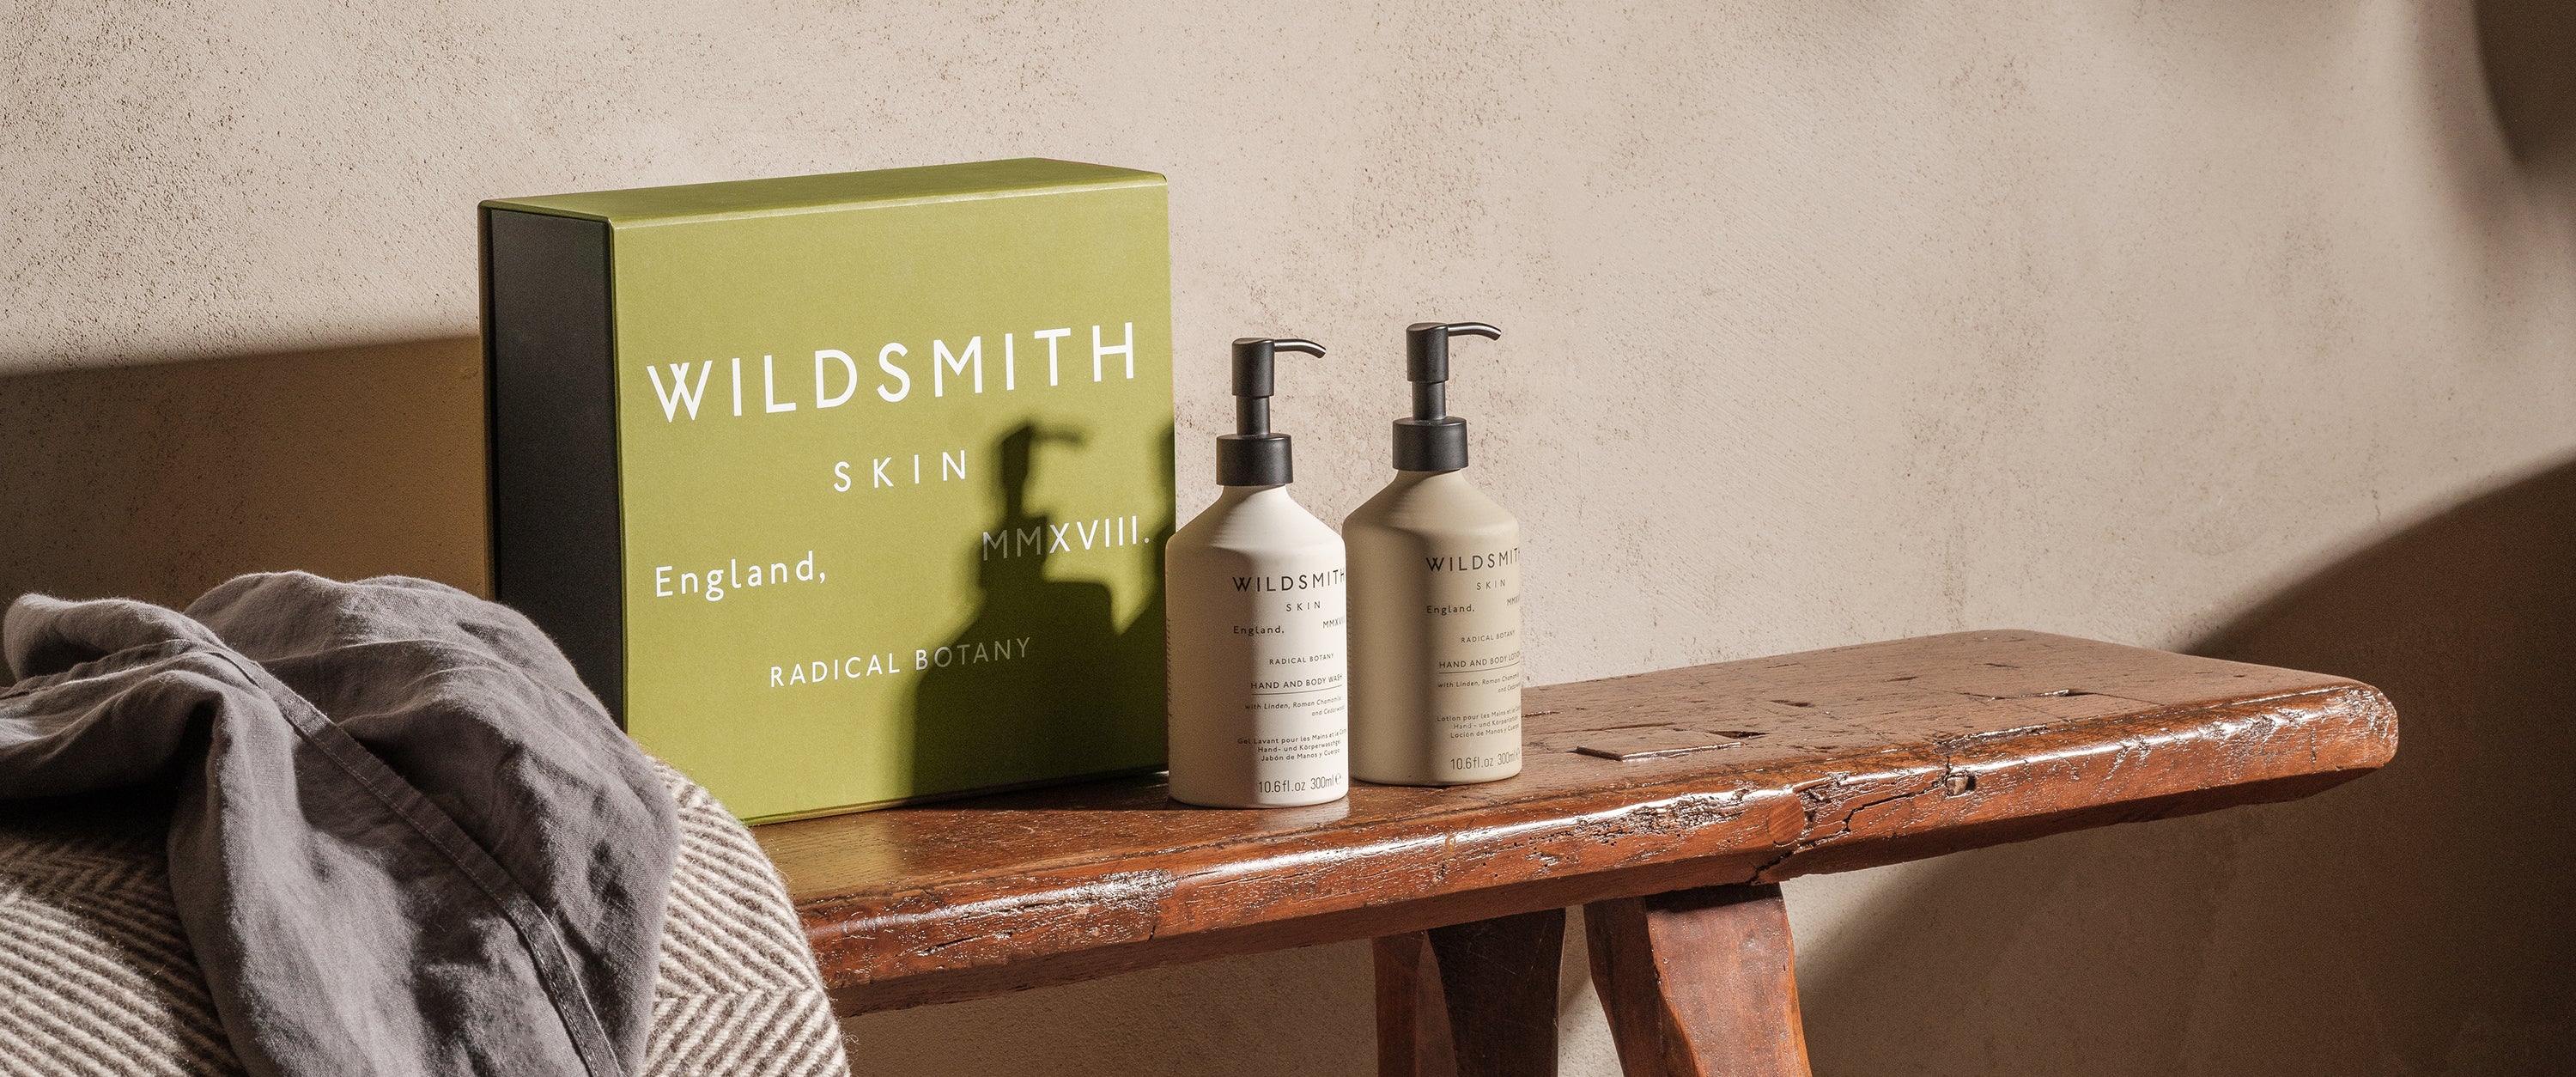 Our curated guide to sustainable skincare gifts